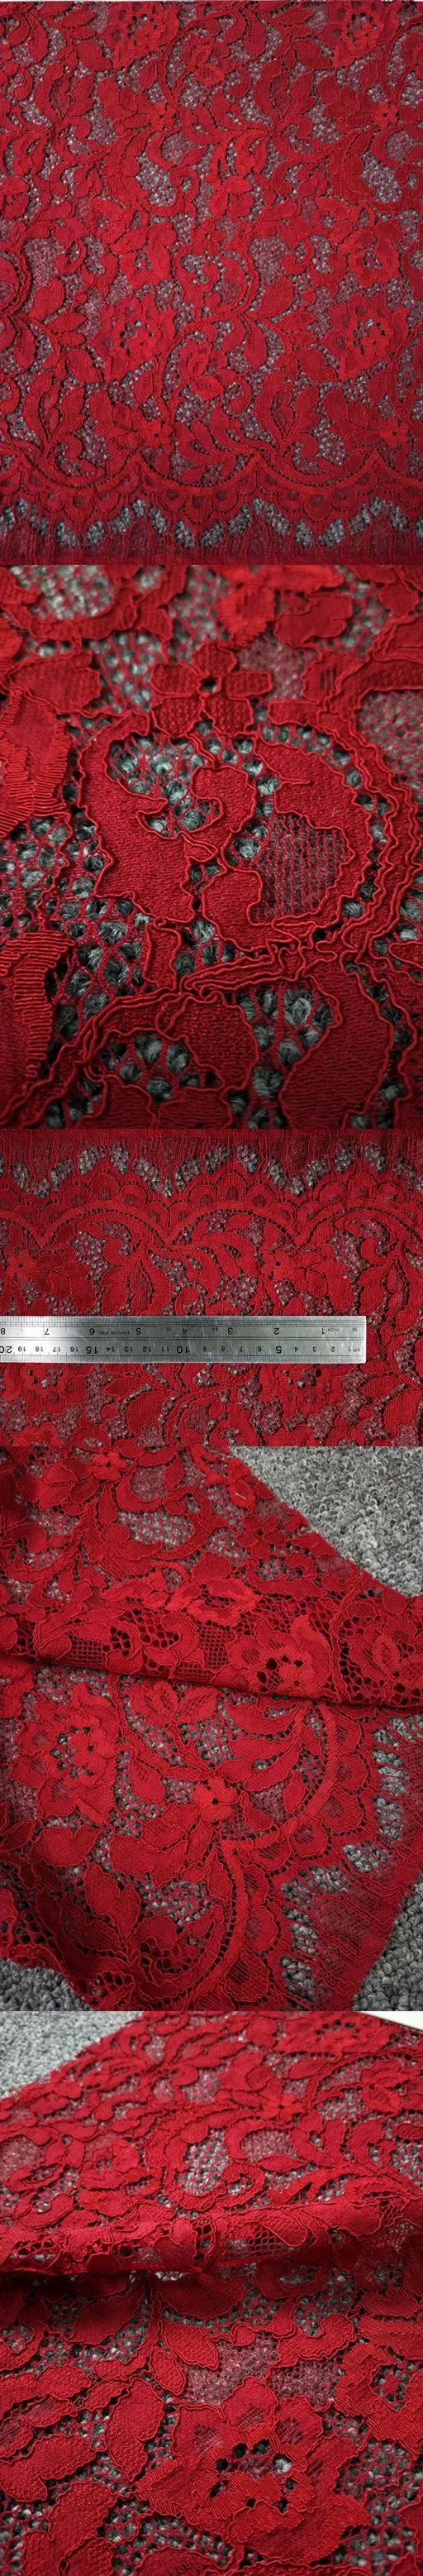 Hot Sale Chemical Lace Red Raschel African Lace Embroidery Lace Fabric for Garment Fashion Accessories